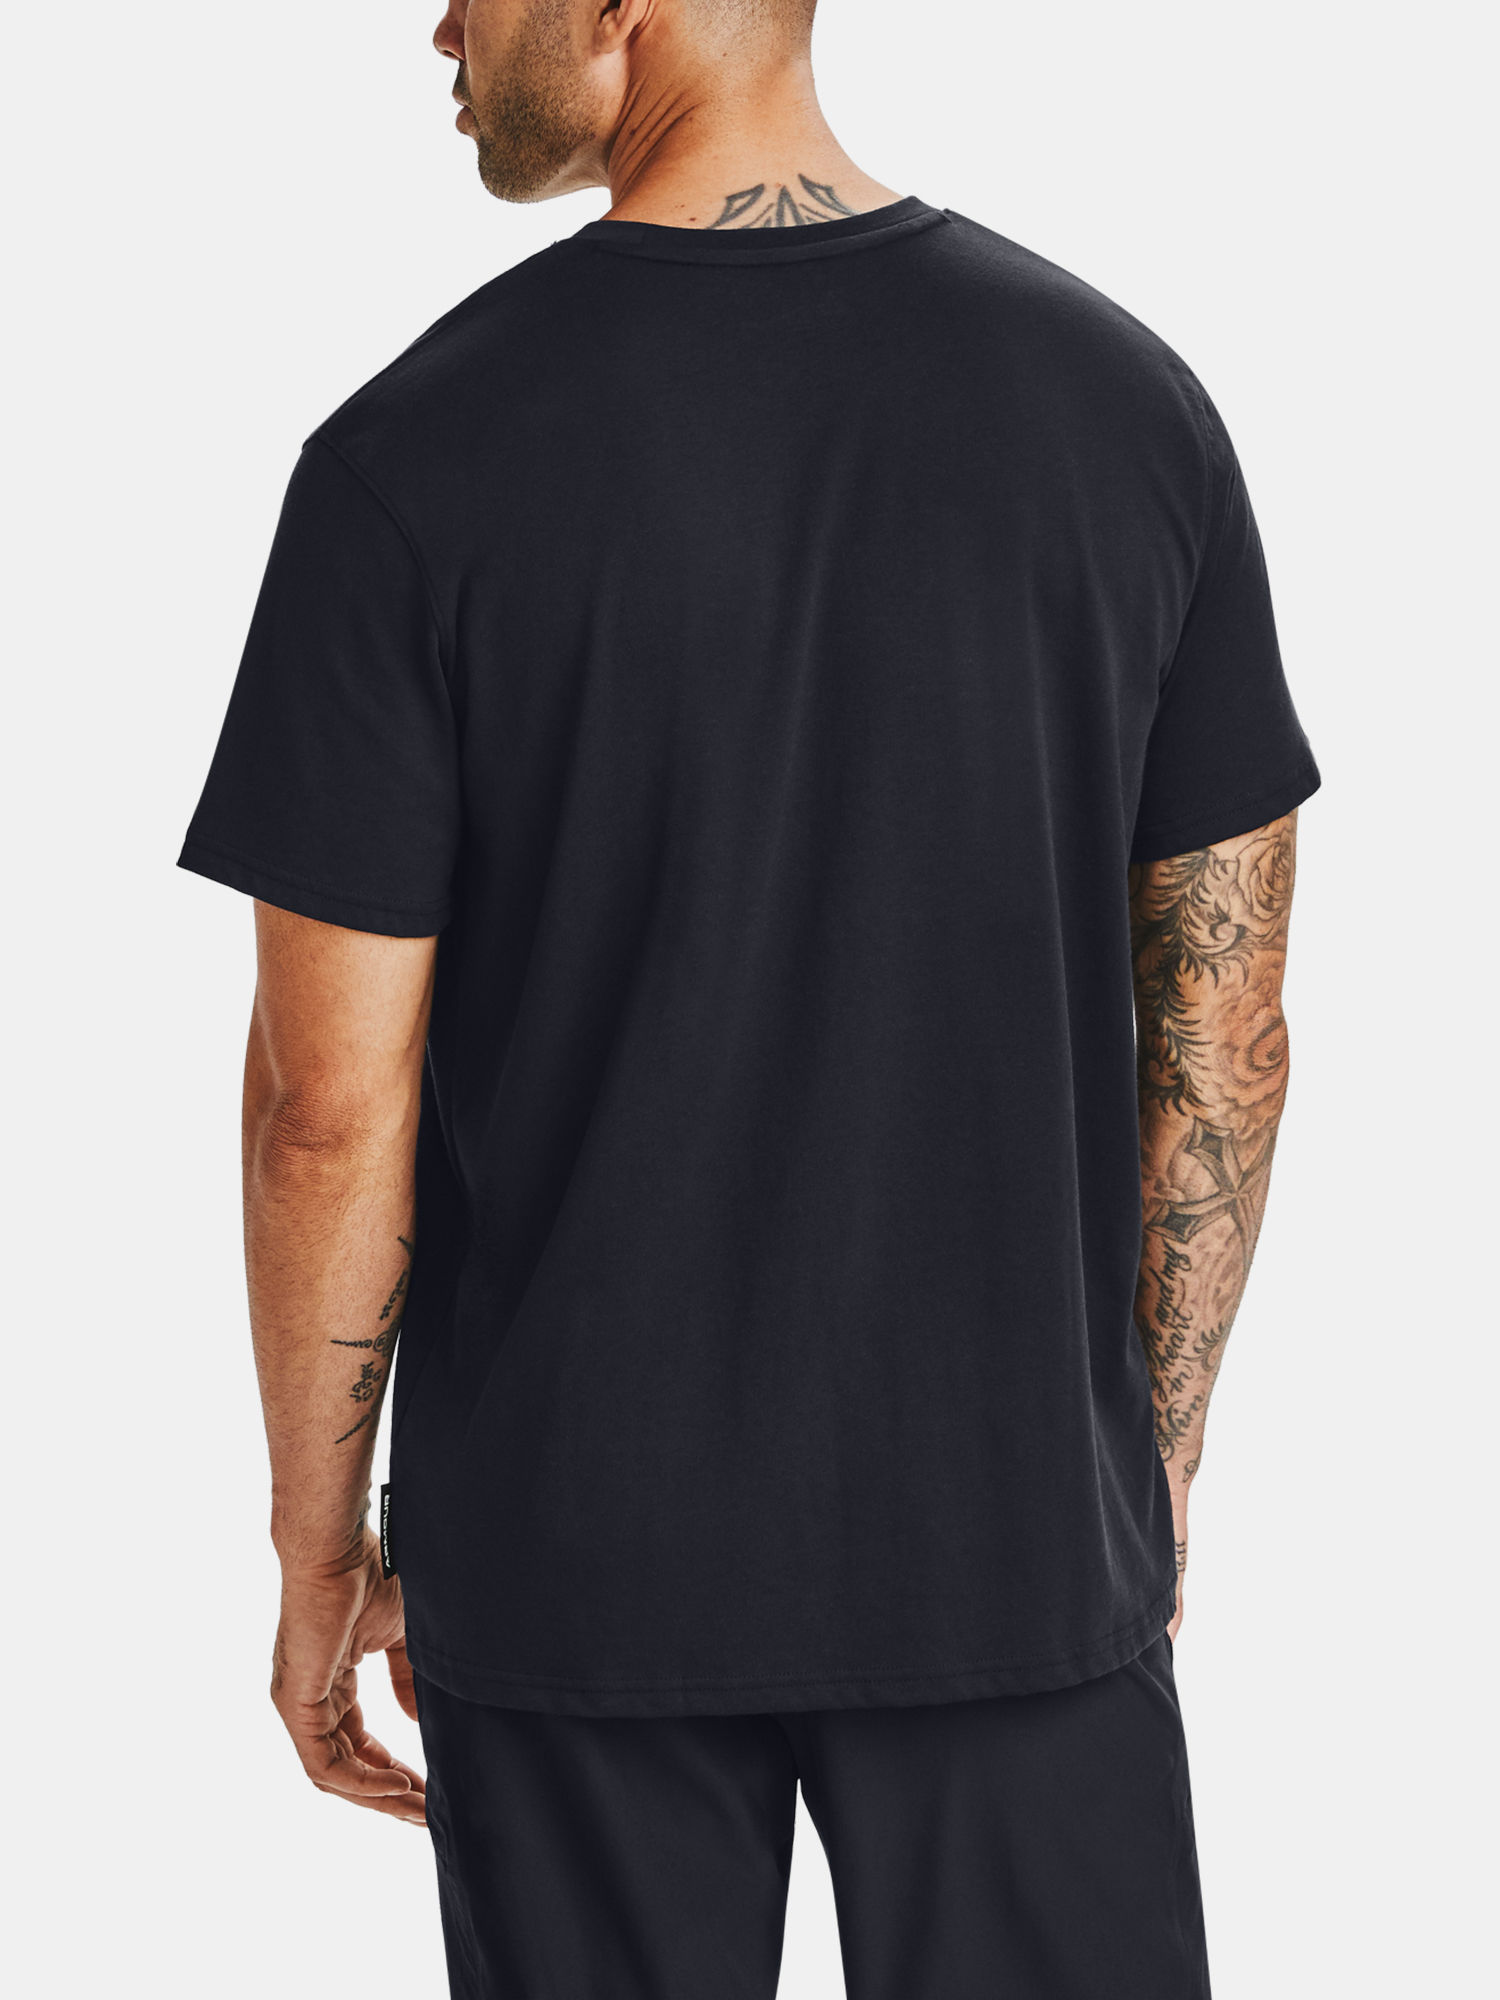 Tričko Under Armour CURRY EMBROIDERED TEE-BLK (2)